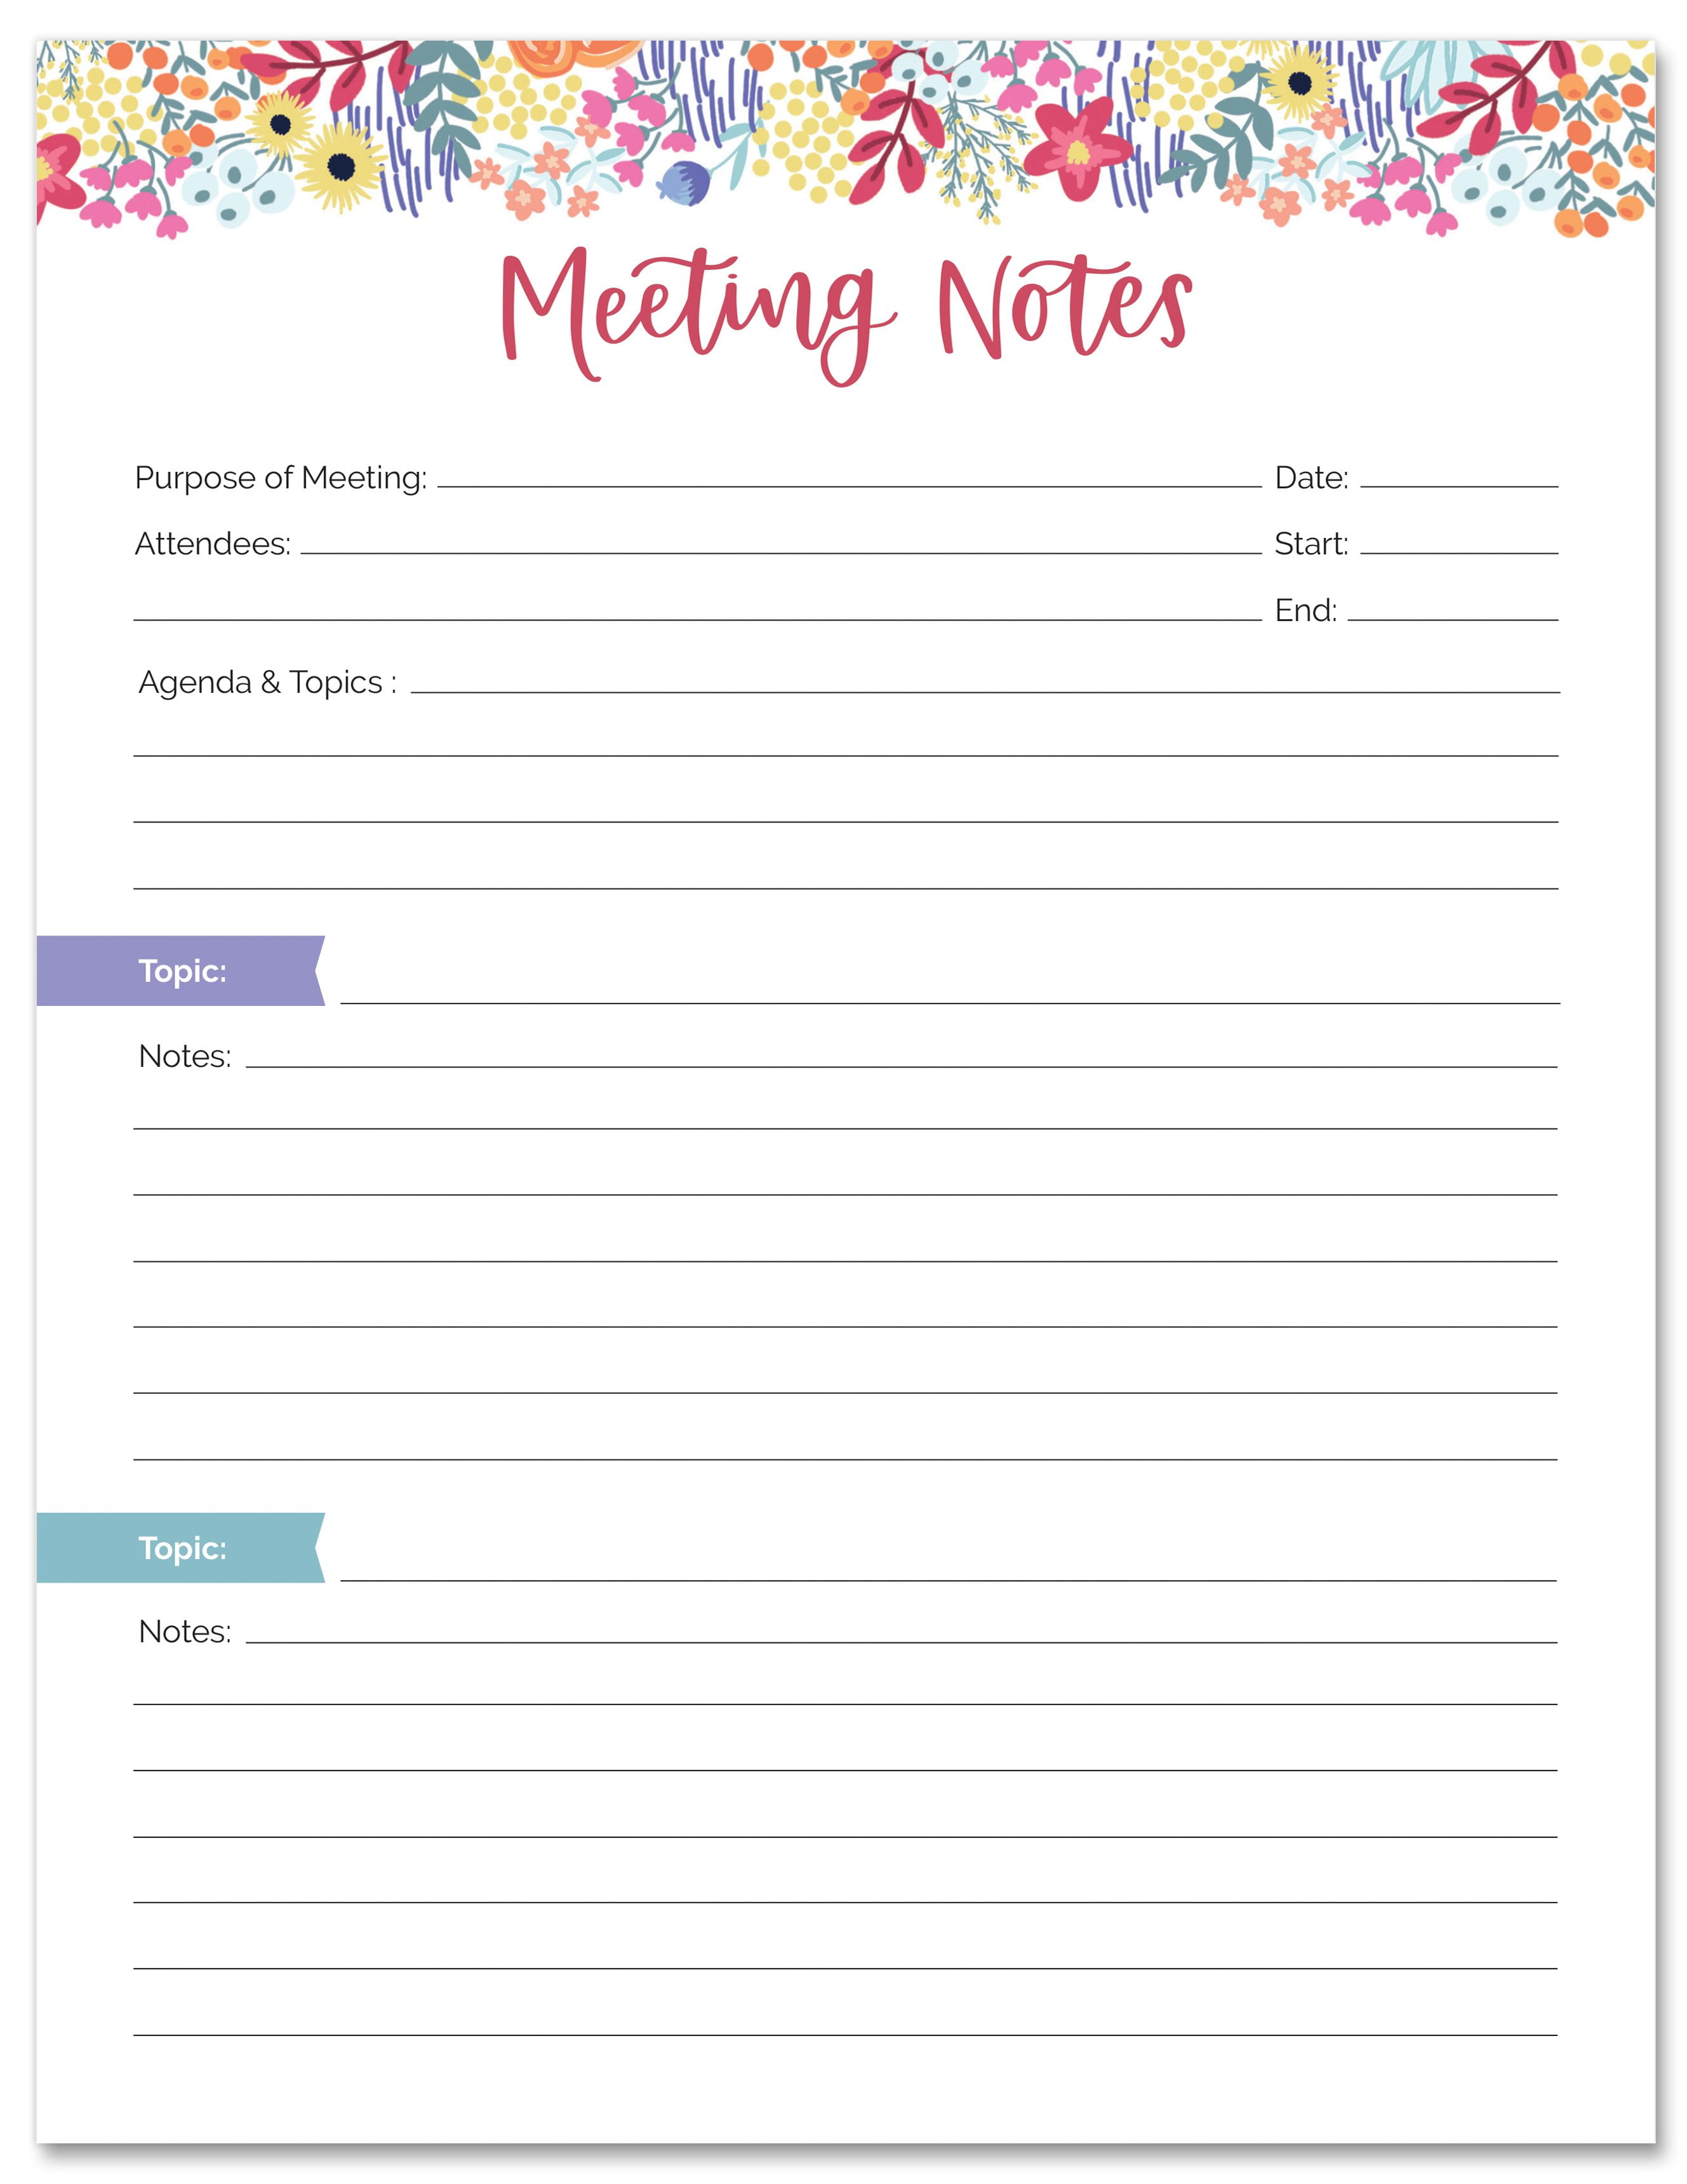 MEETING NOTES PLANNING PAD, 21.21" X 21" - bloom For Template For Meeting Notes